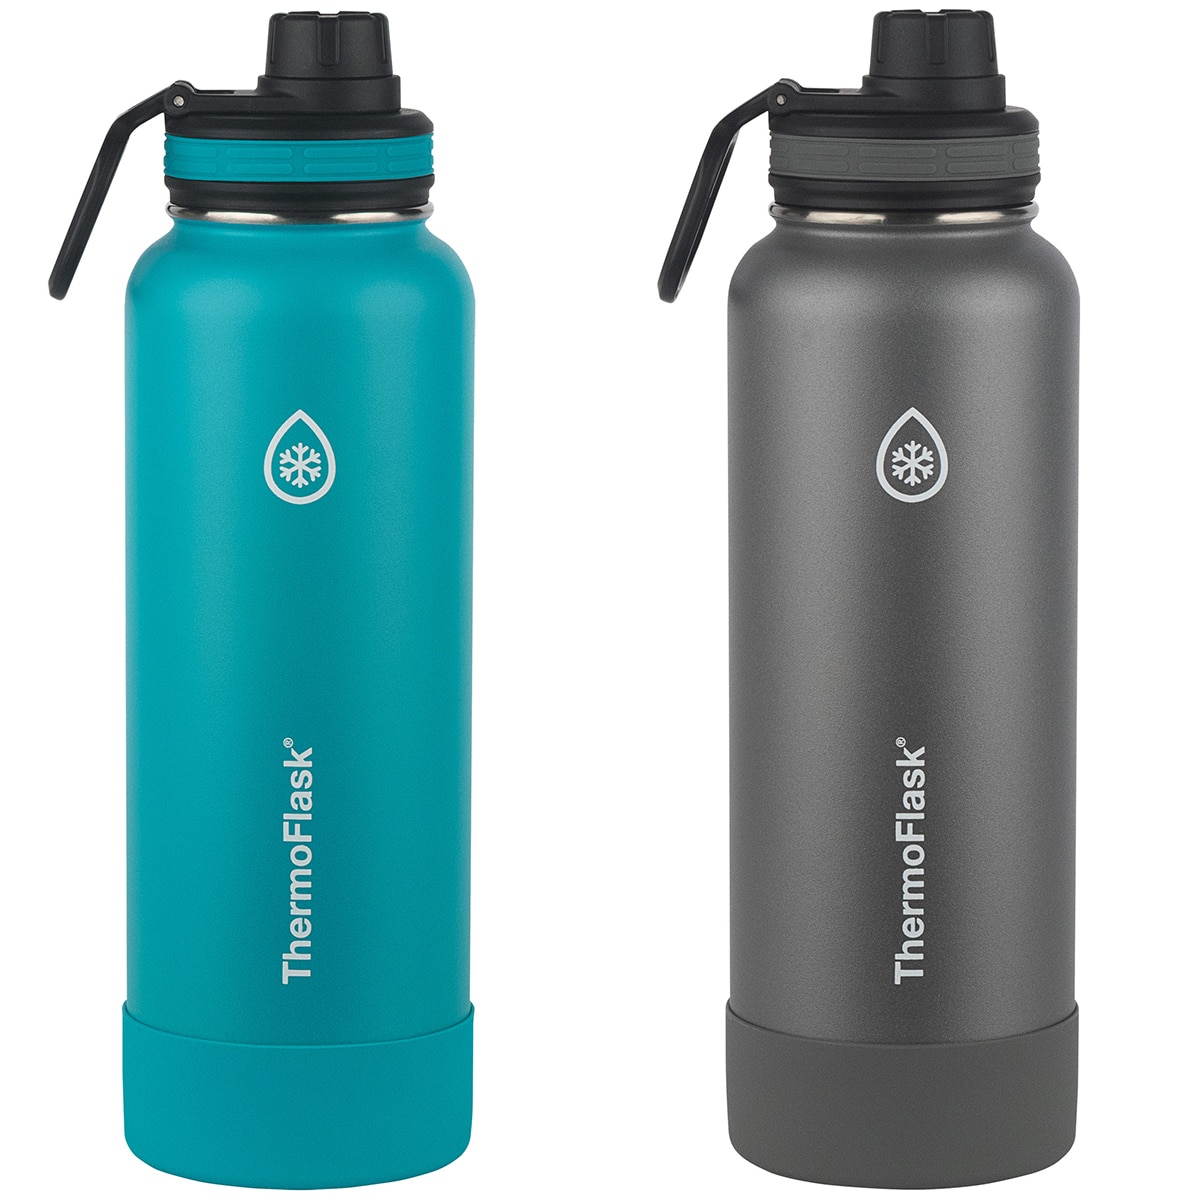 Thermoflask Double Wall Vacuum Insulated Stainless Steel Water Bottle 2-Pack 